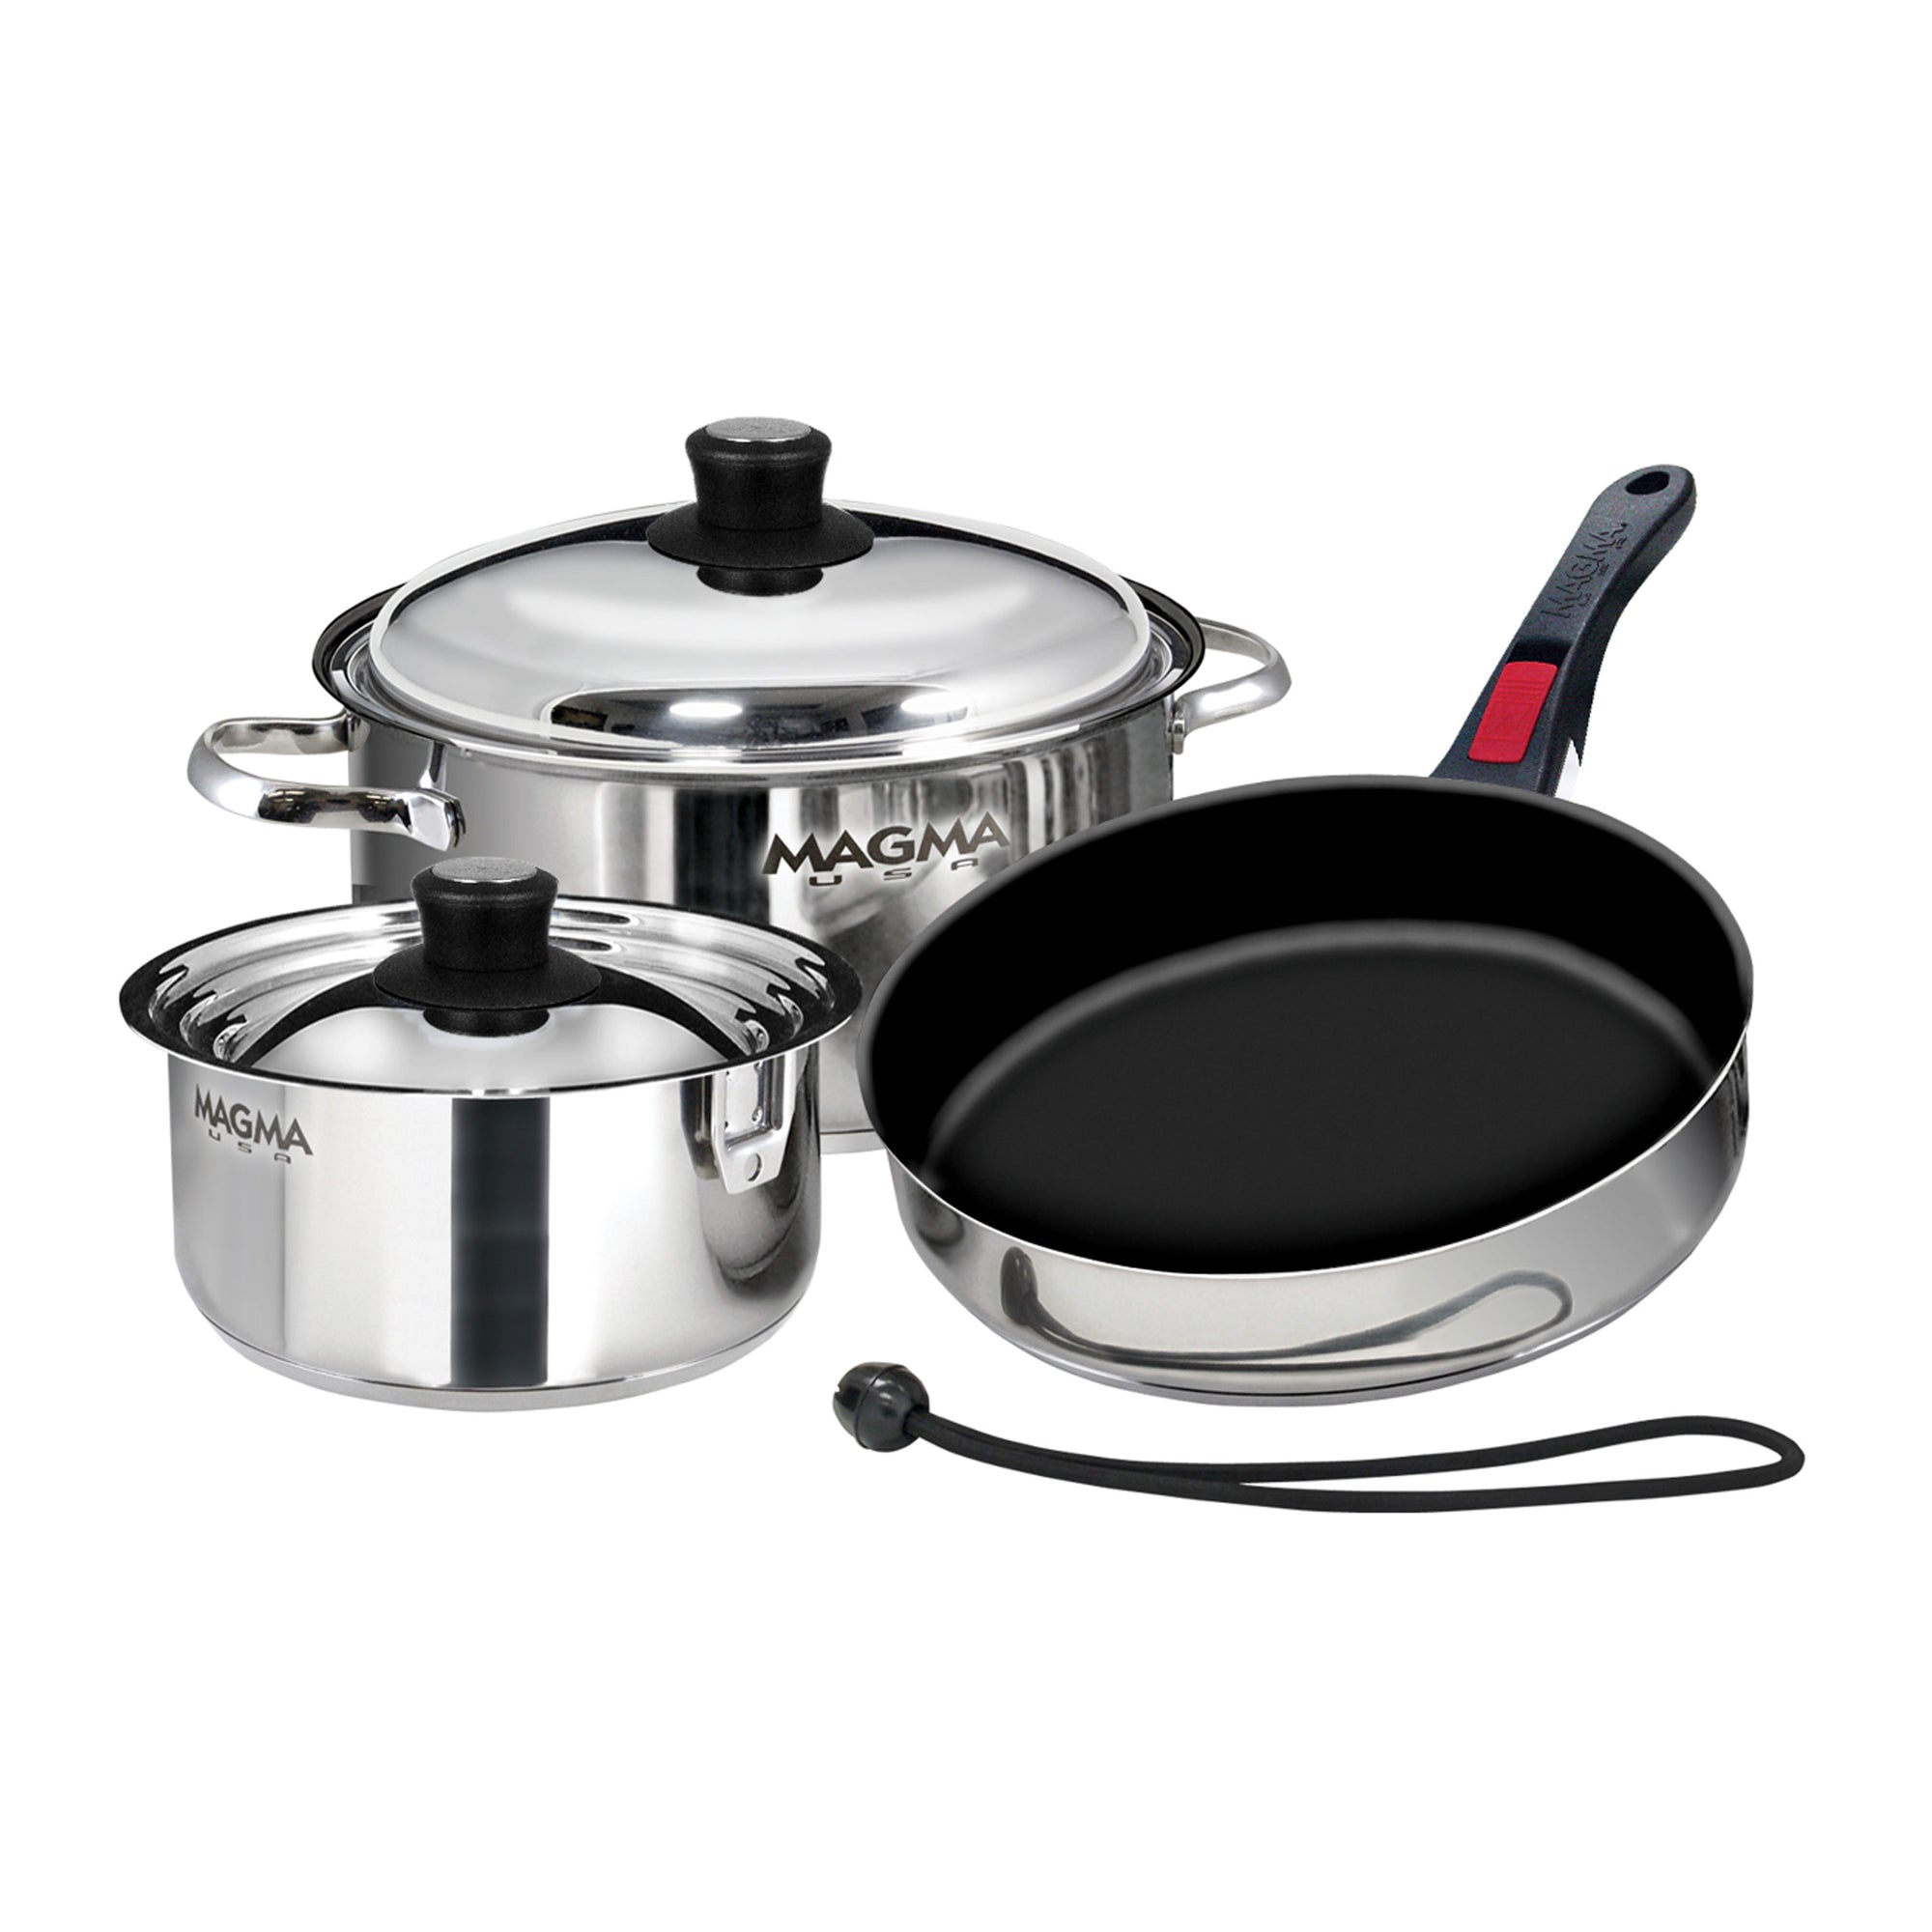 Magma A10-363-2-IND Cookware - 7 PC Set, Non-Stick